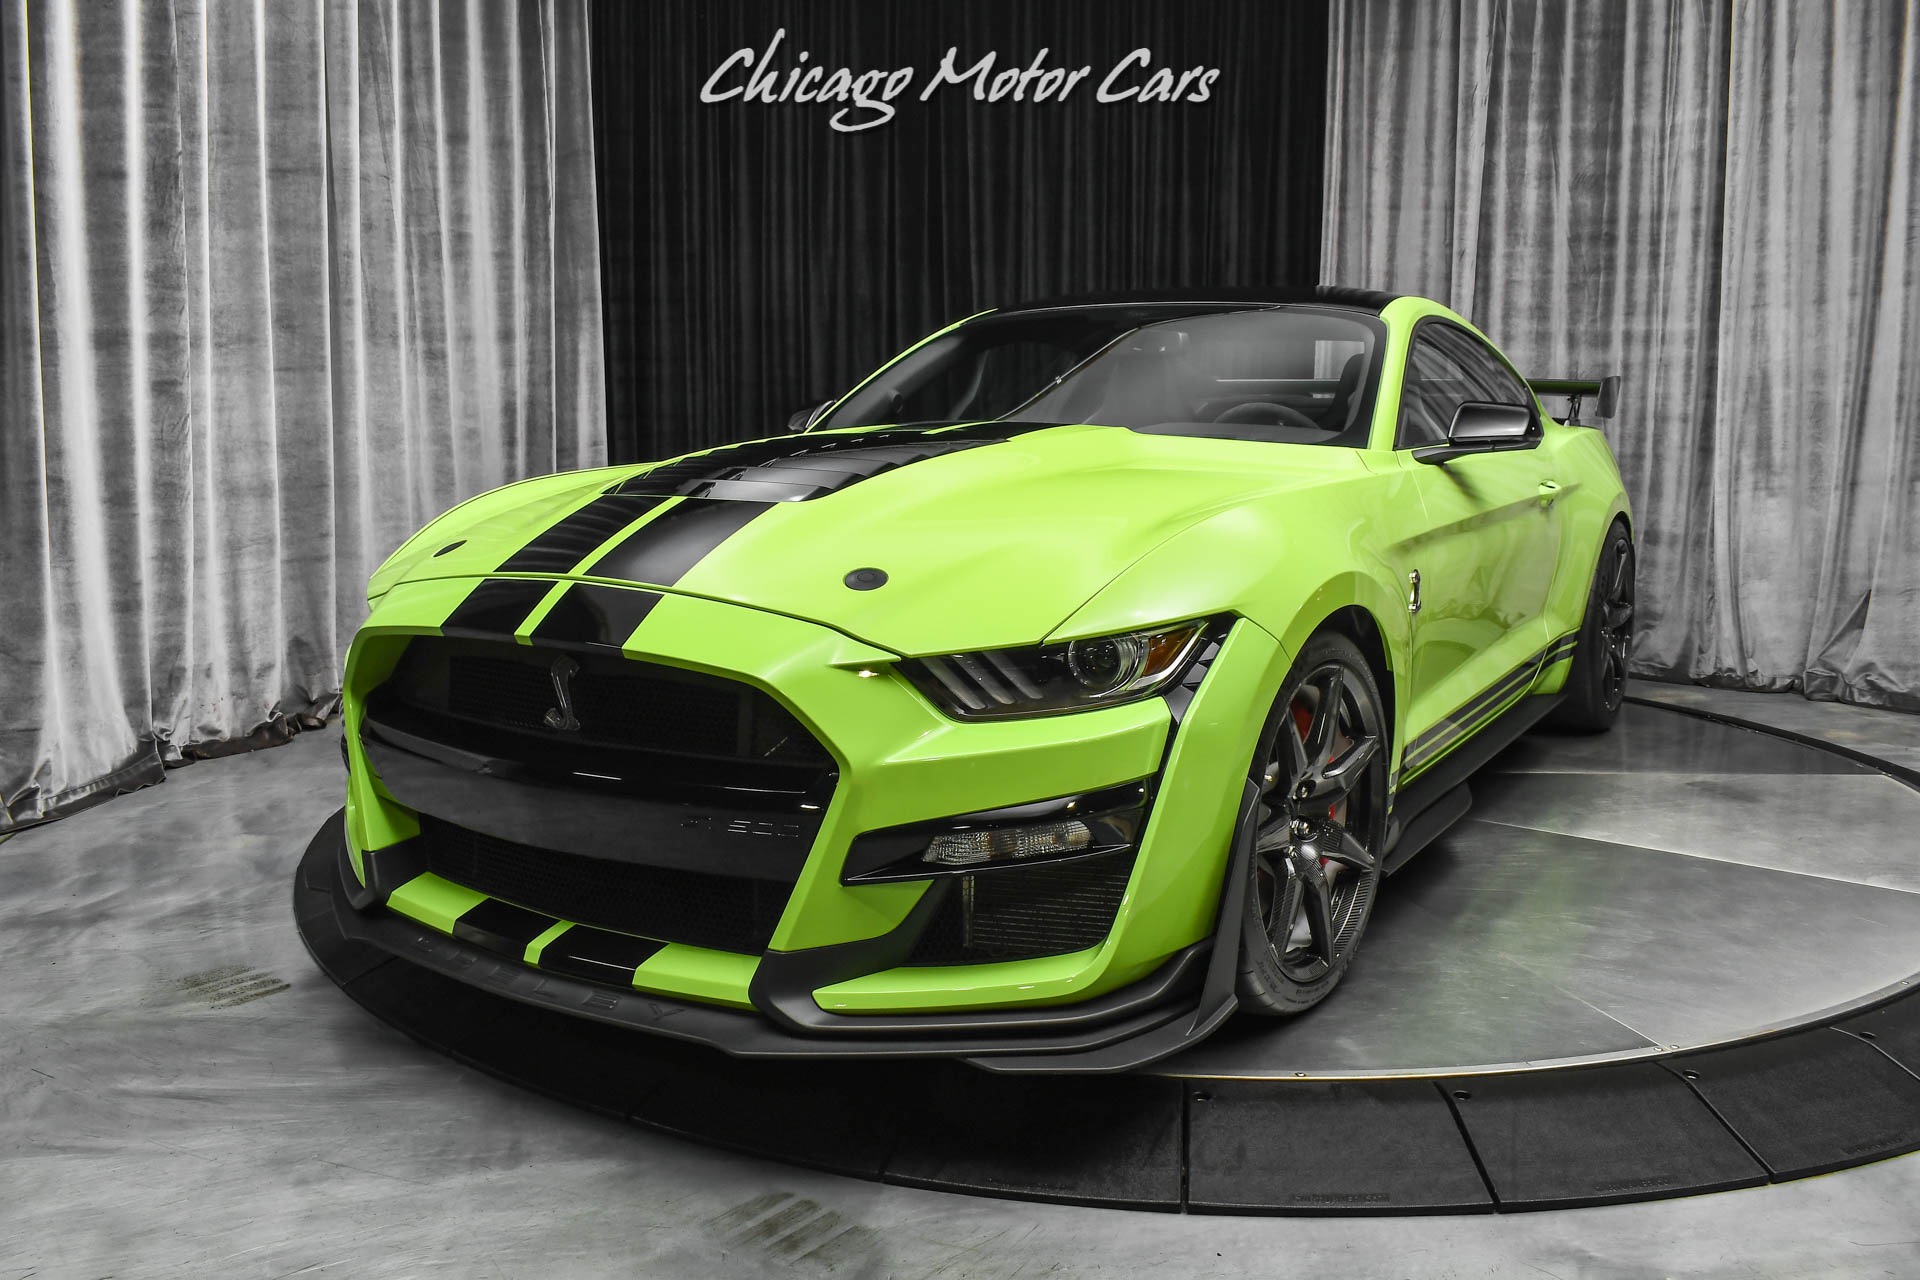 Used-2020-Ford-Mustang-Shelby-GT500-Coupe-ONLY-500-Miles-GOLDEN-TICKET-Carbon-Track-Pack-Carbon